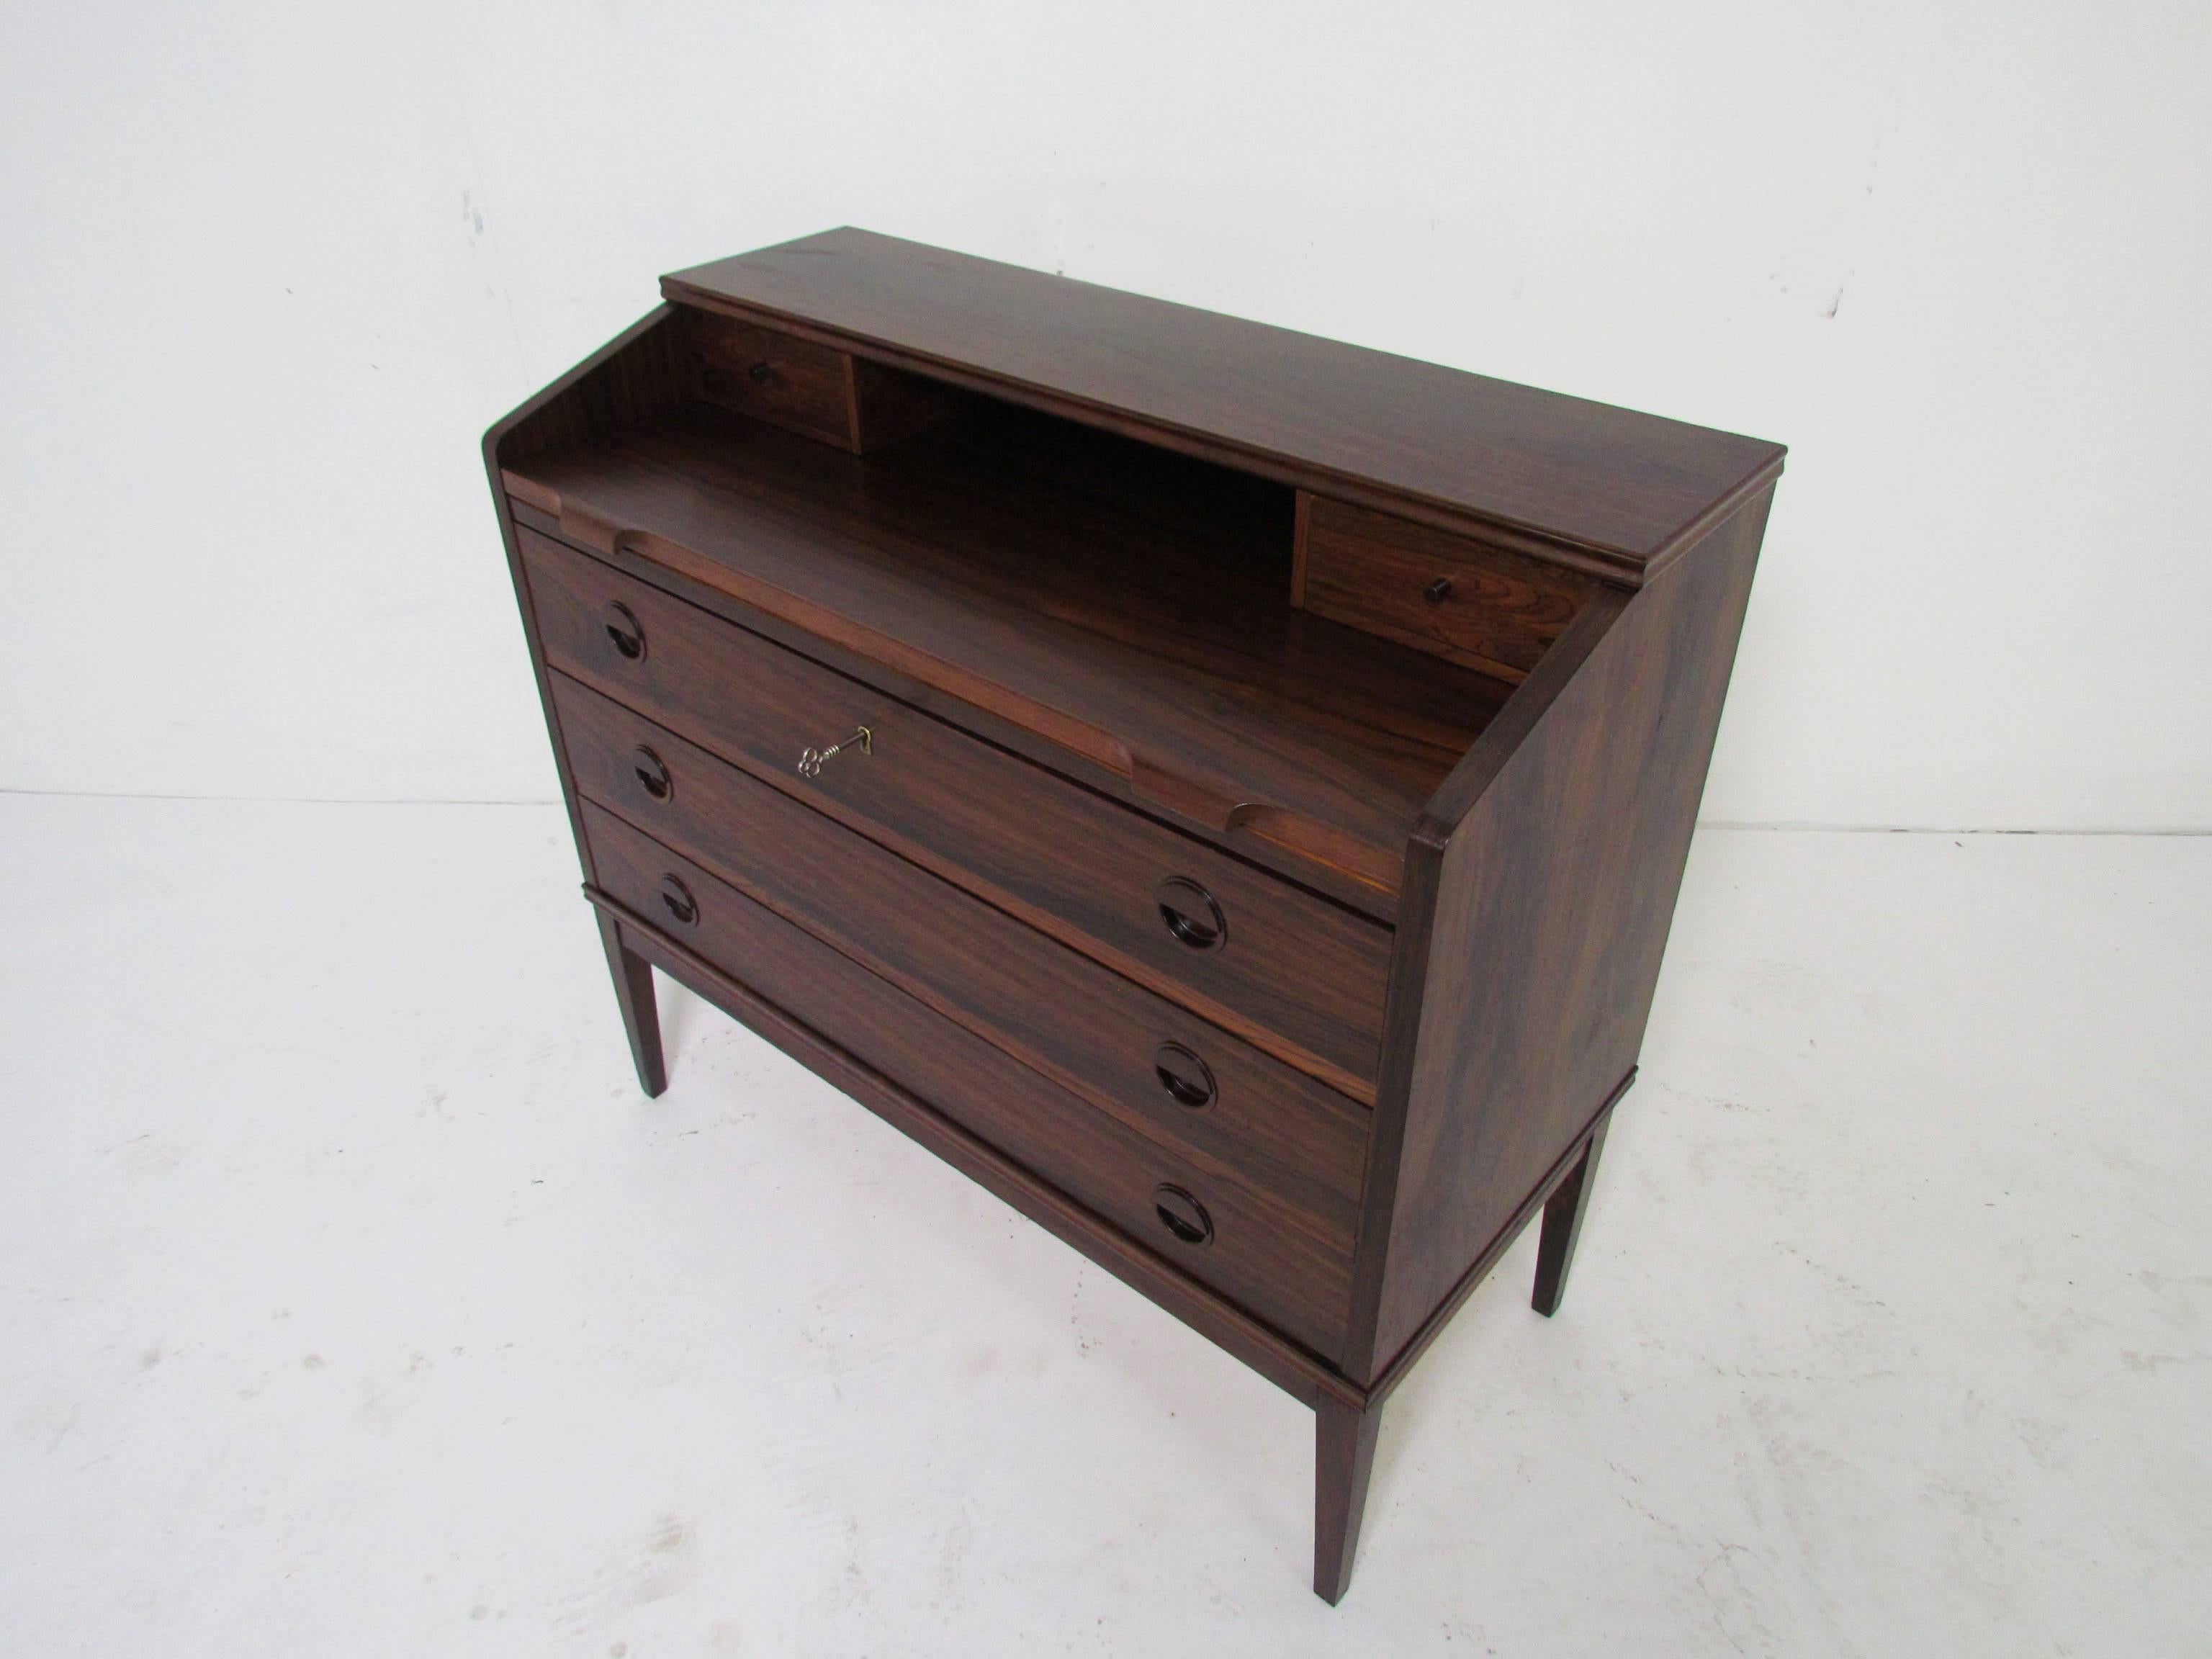 Rosewood secretary desk with pull-out desk top, three large lower drawers (one with key) and two upper small stationery drawers. Made by Riis Antonsen, Denmark.

Height to desk surface is 29